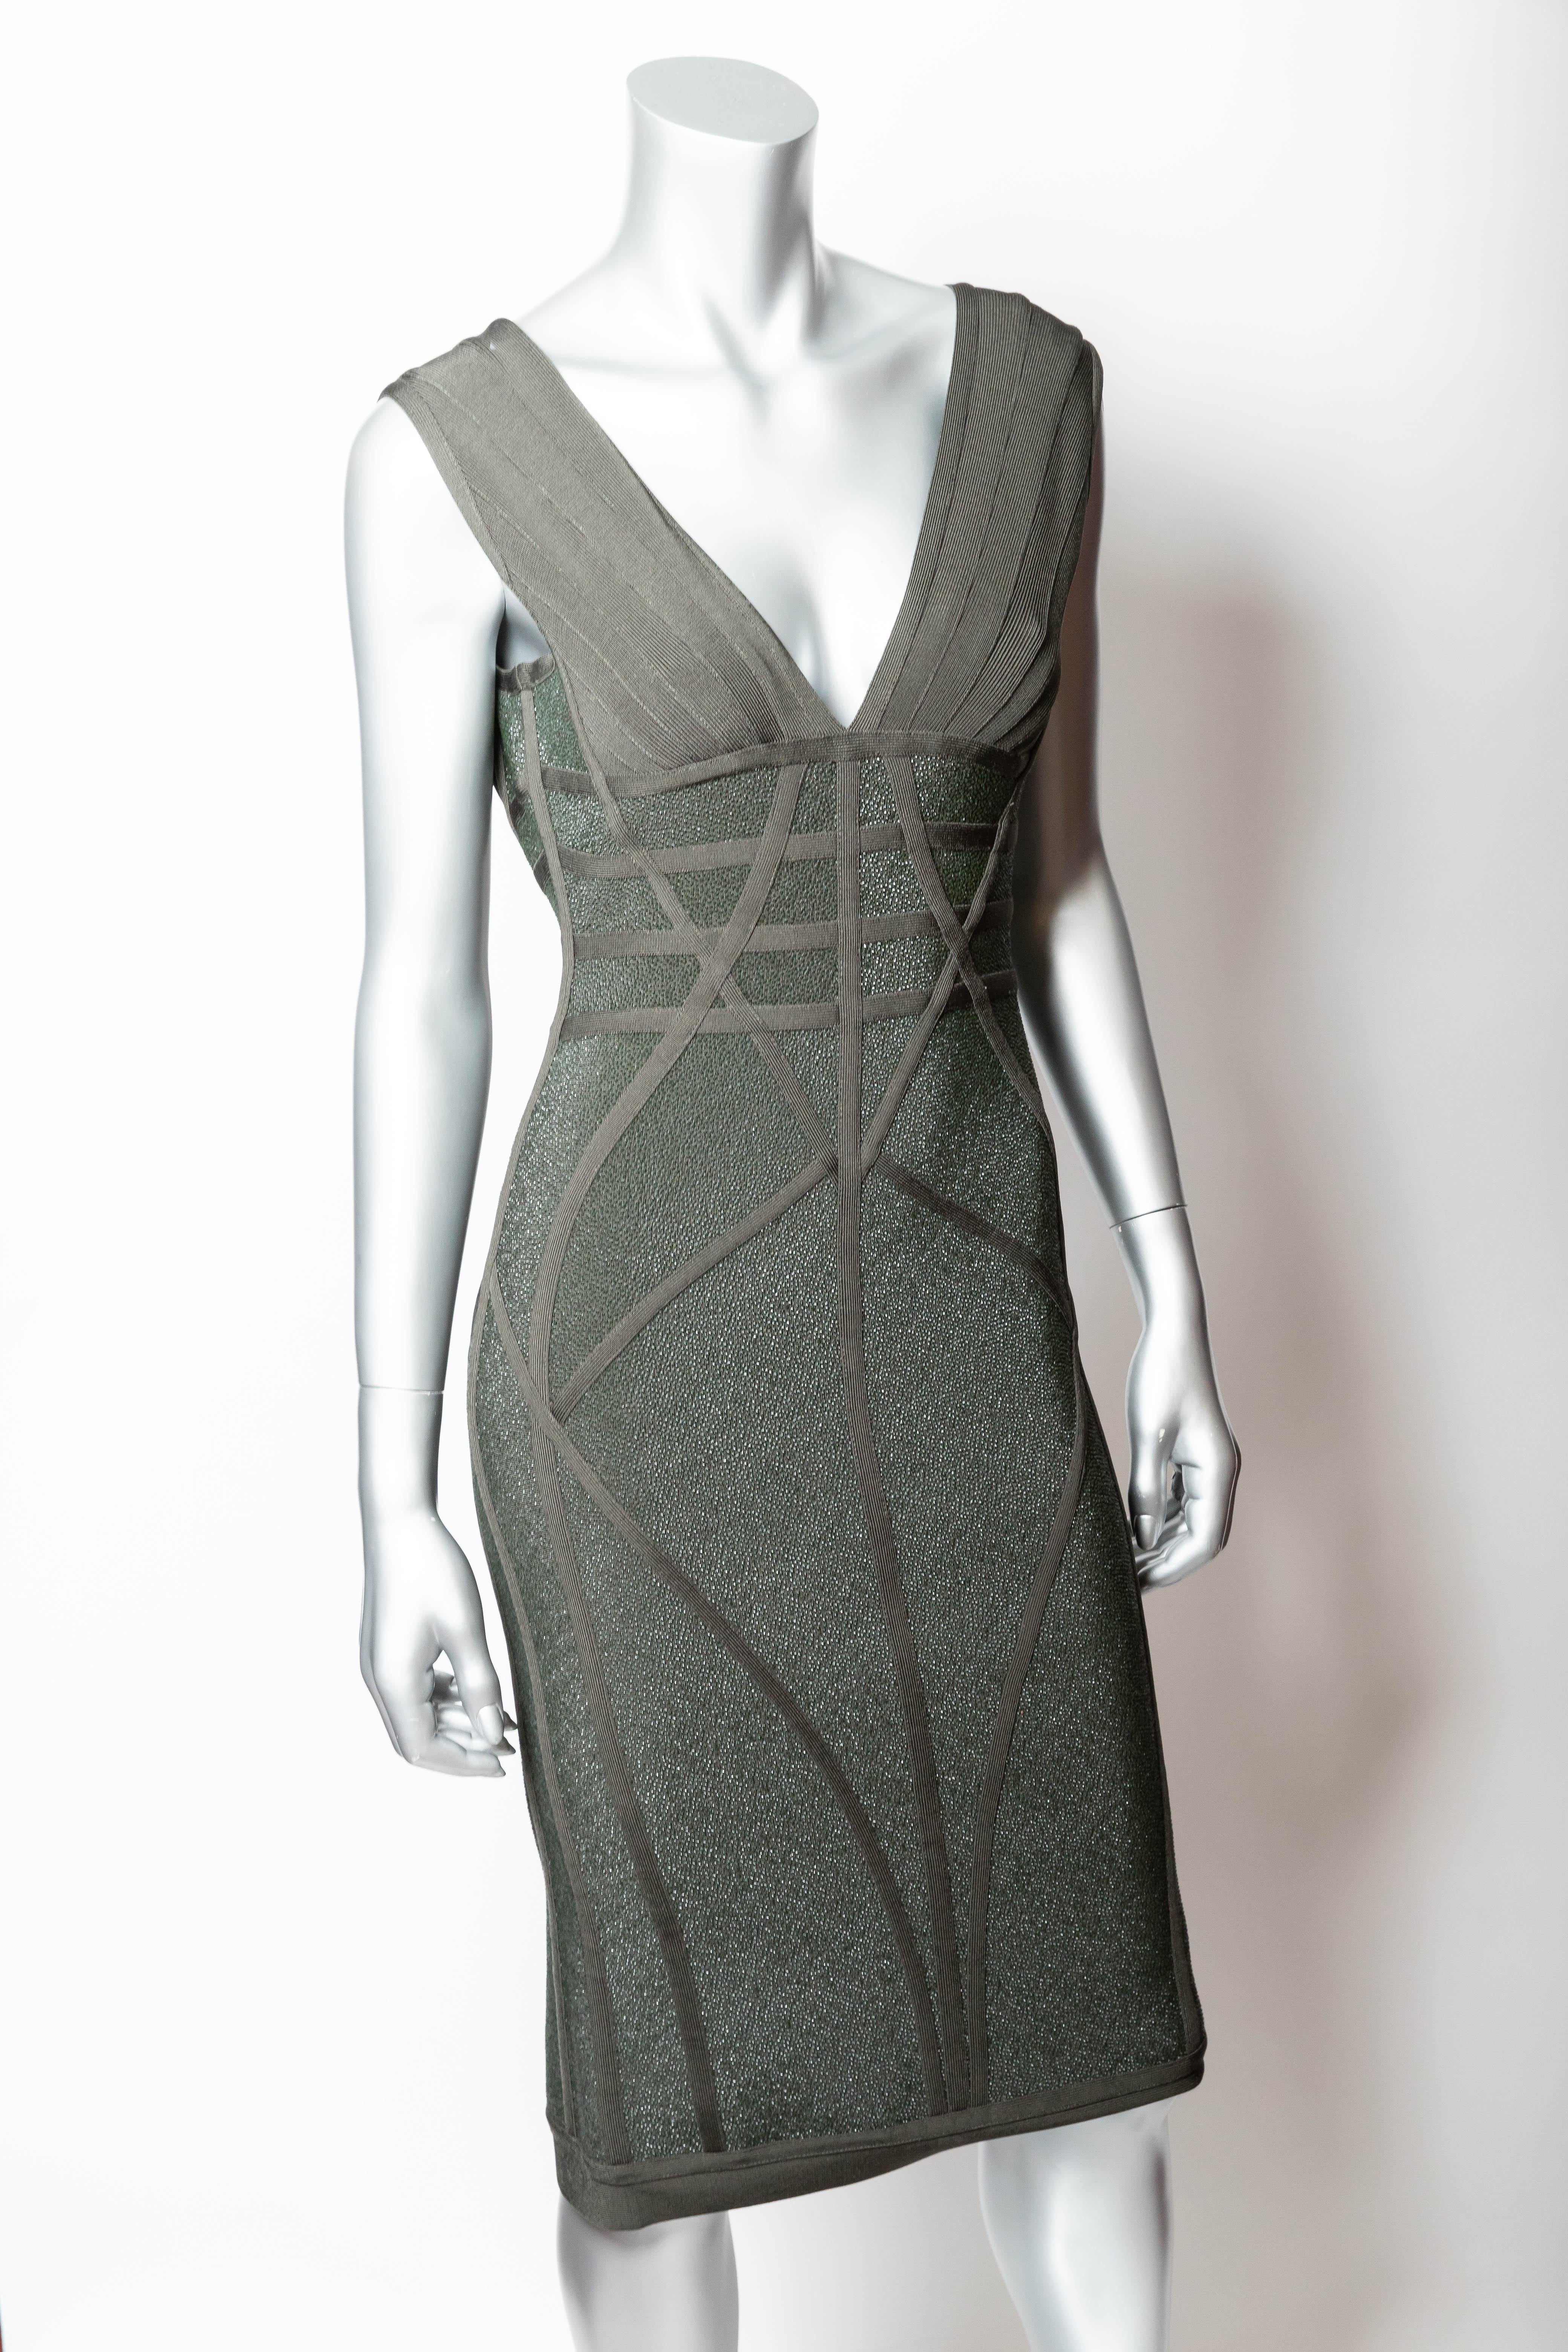 Herve Leger Dress - Medium In Excellent Condition For Sale In Westhampton Beach, NY